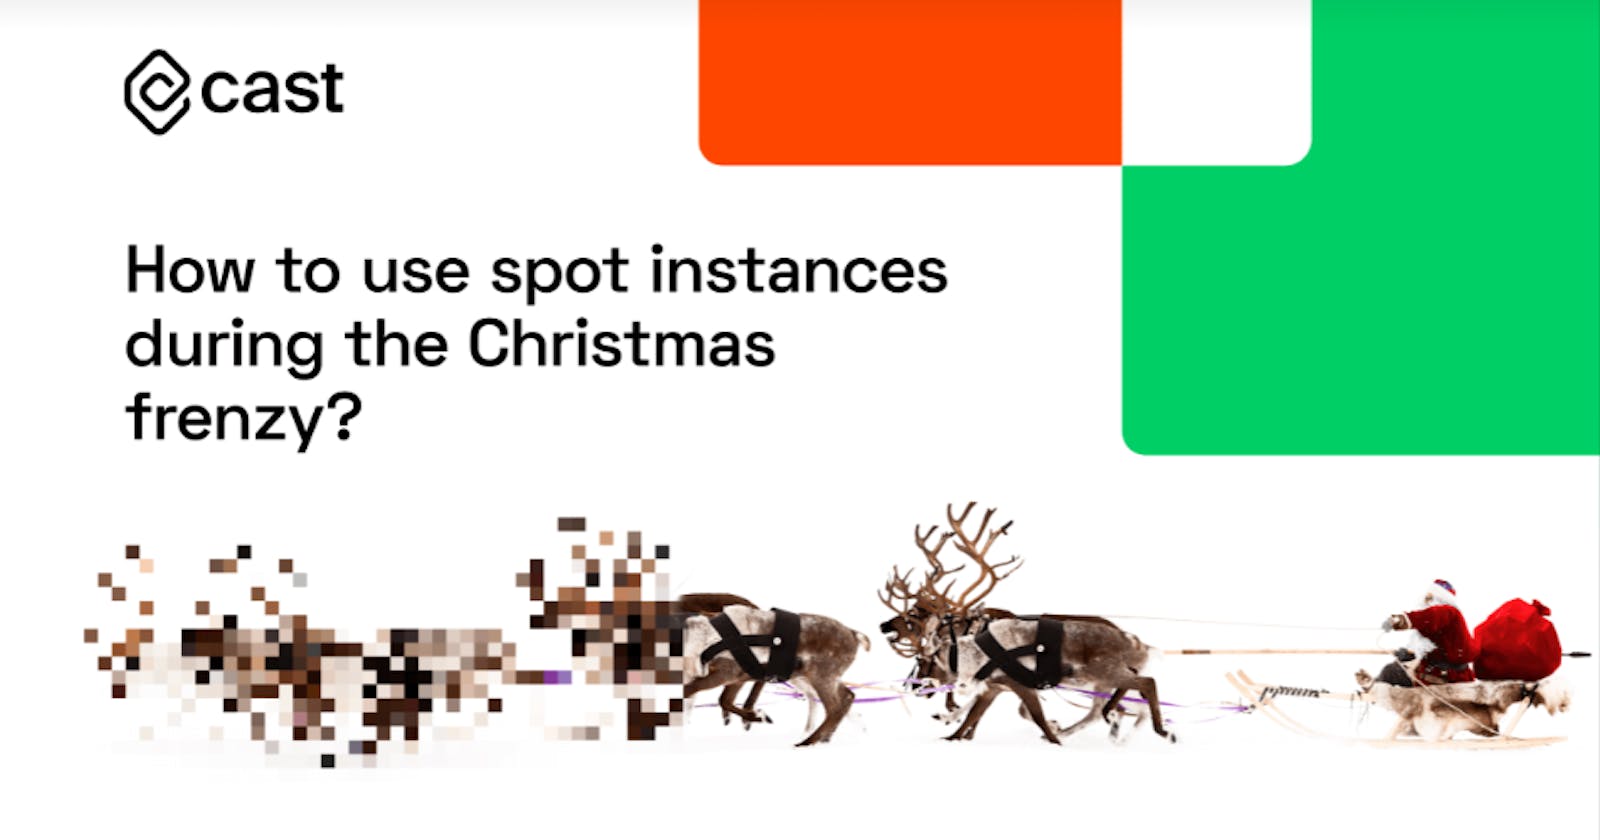 How to use spot instances during the Christmas frenzy?